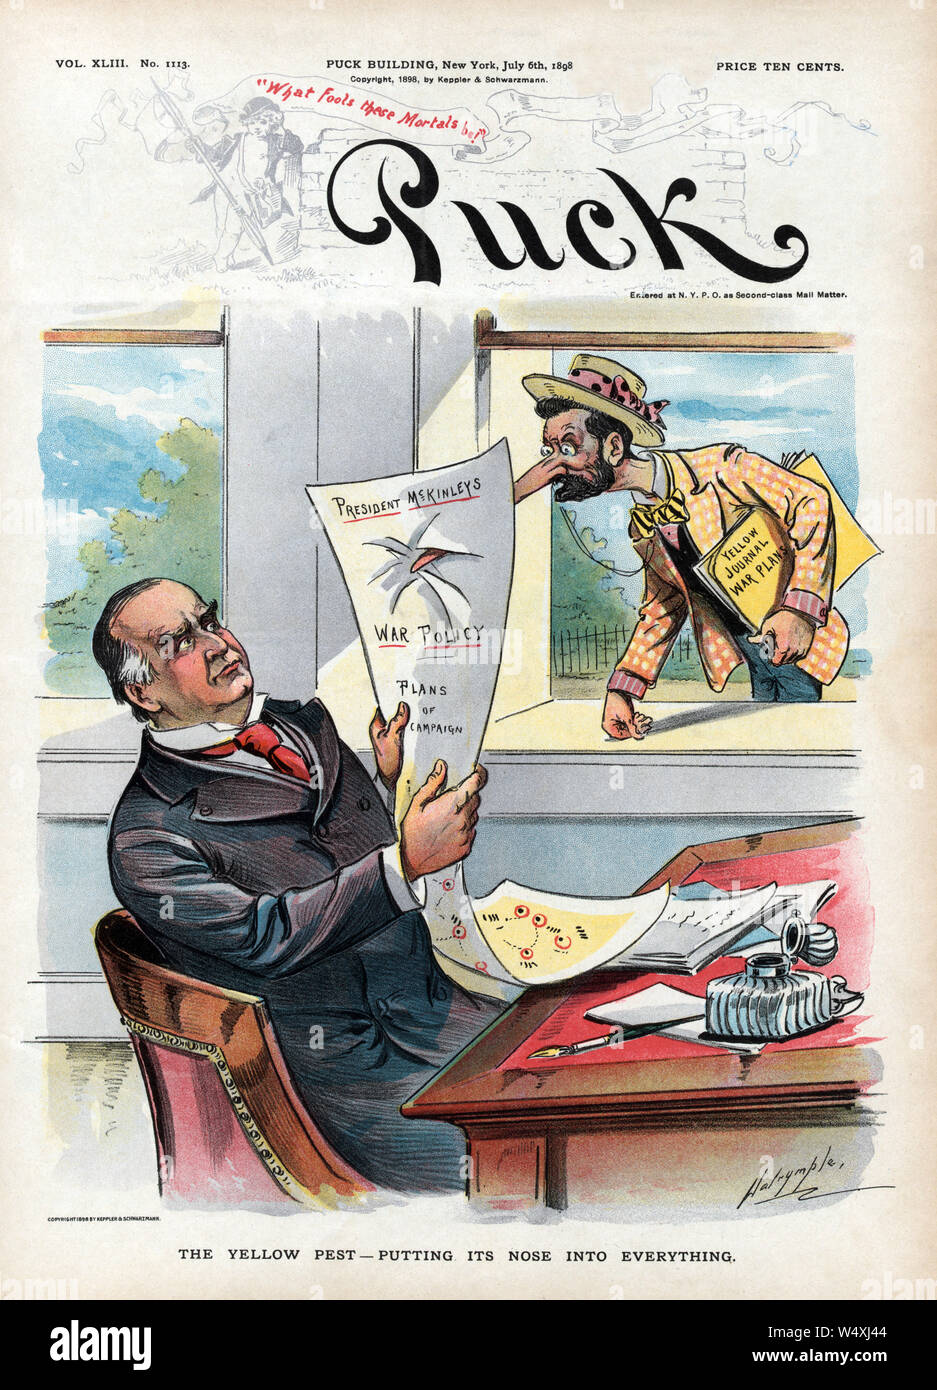 'The Yellow Pest - Putting its Nose into Everything', Political Cartoon featuring U.S. President William McKinley and a man, Possibly Joseph Pulitzer, carrying Sheets of Paper labeled 'Yellow Journal War Plans', Poking his Nose into McKinley's 'Plans of Campaign', Puck Magazine, Artwork by Louis Dalrymple, Published by Keppler & Schwartzmann, July 6, 1898 Stock Photo